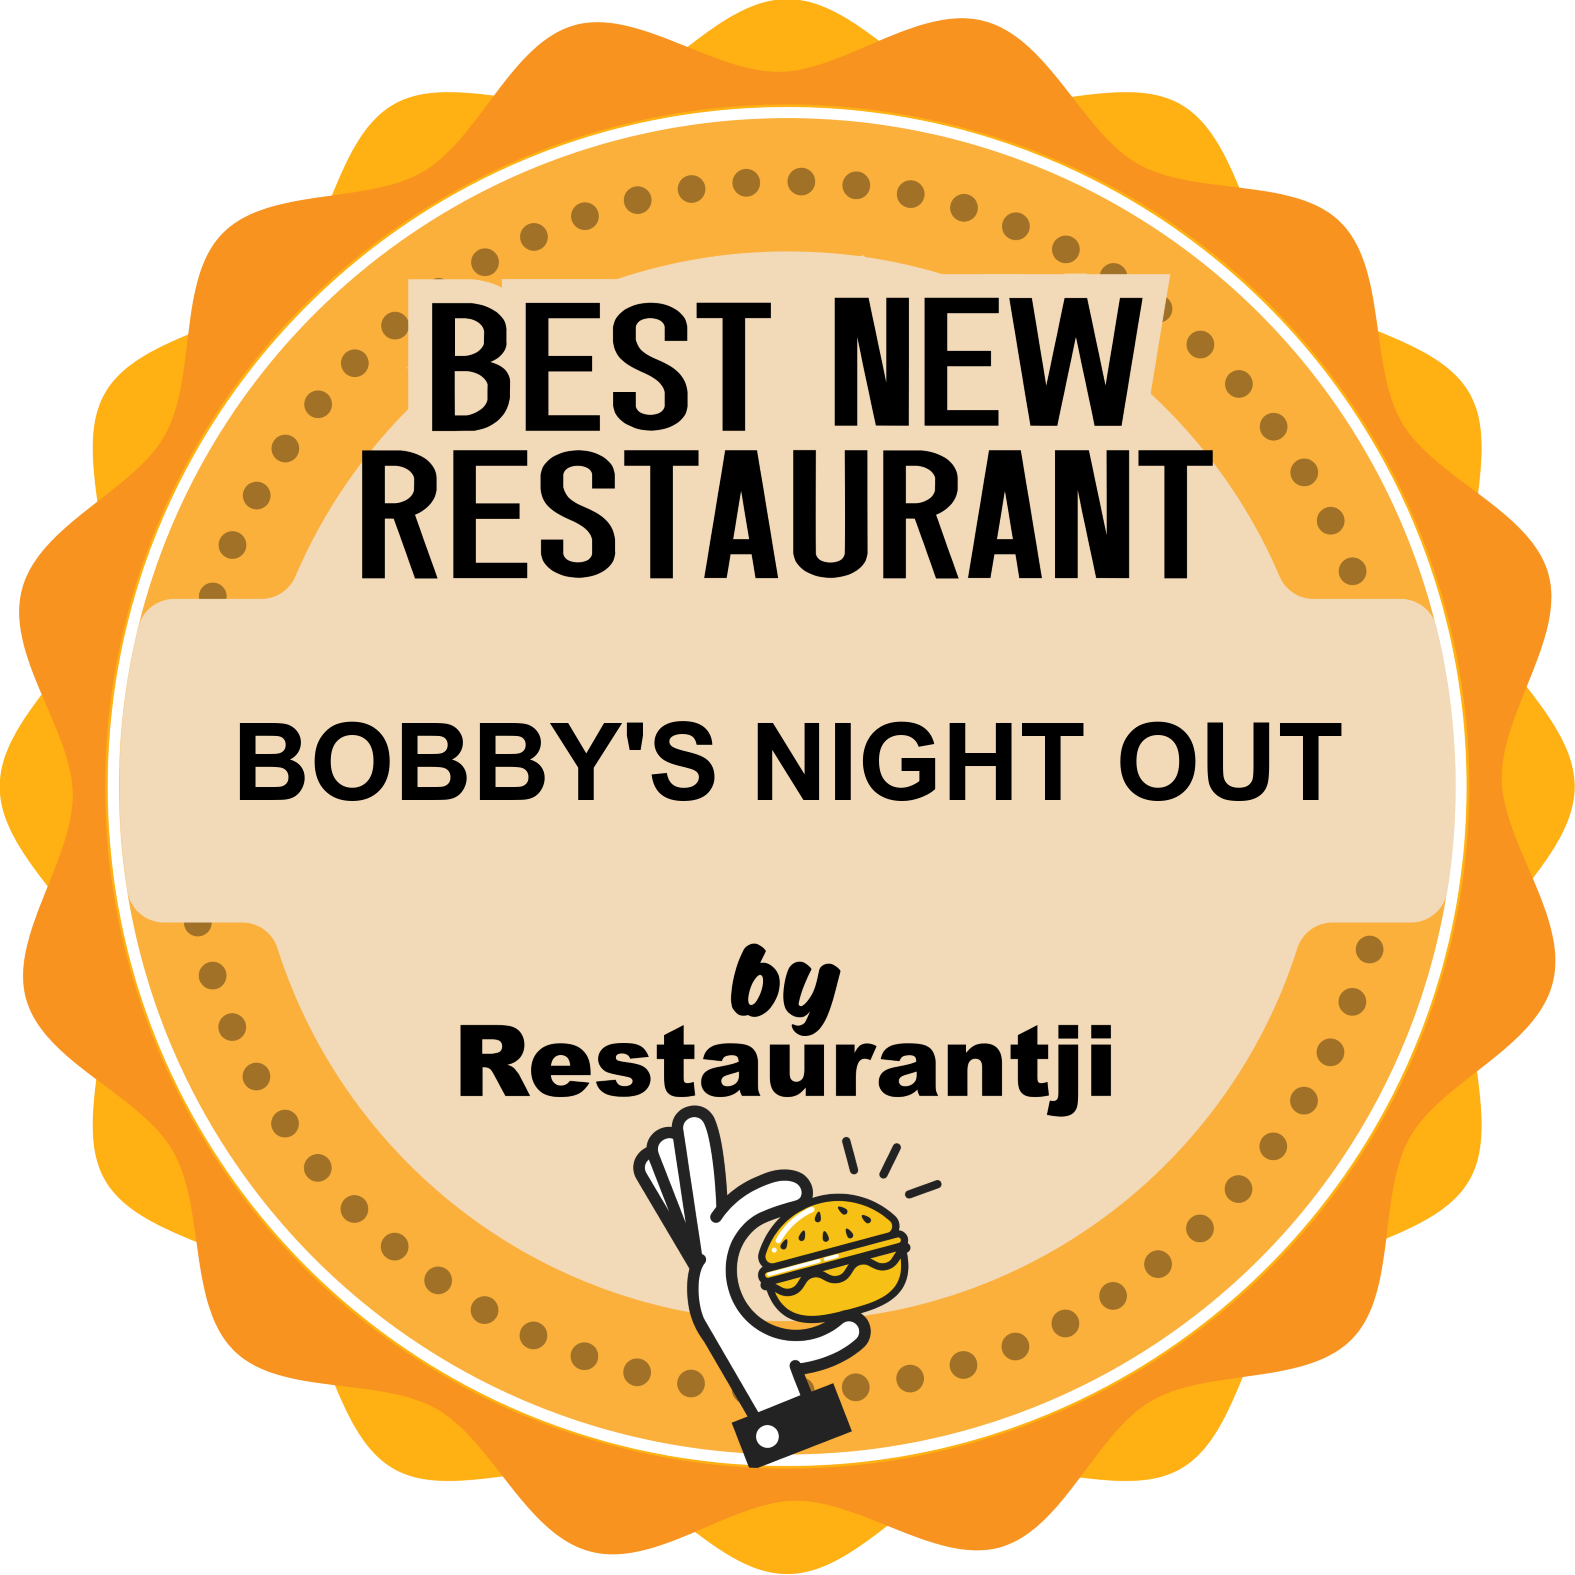 Bobby's Night Out is a must-visit according to Restaurantji - your go-to source for the best local restaurants.